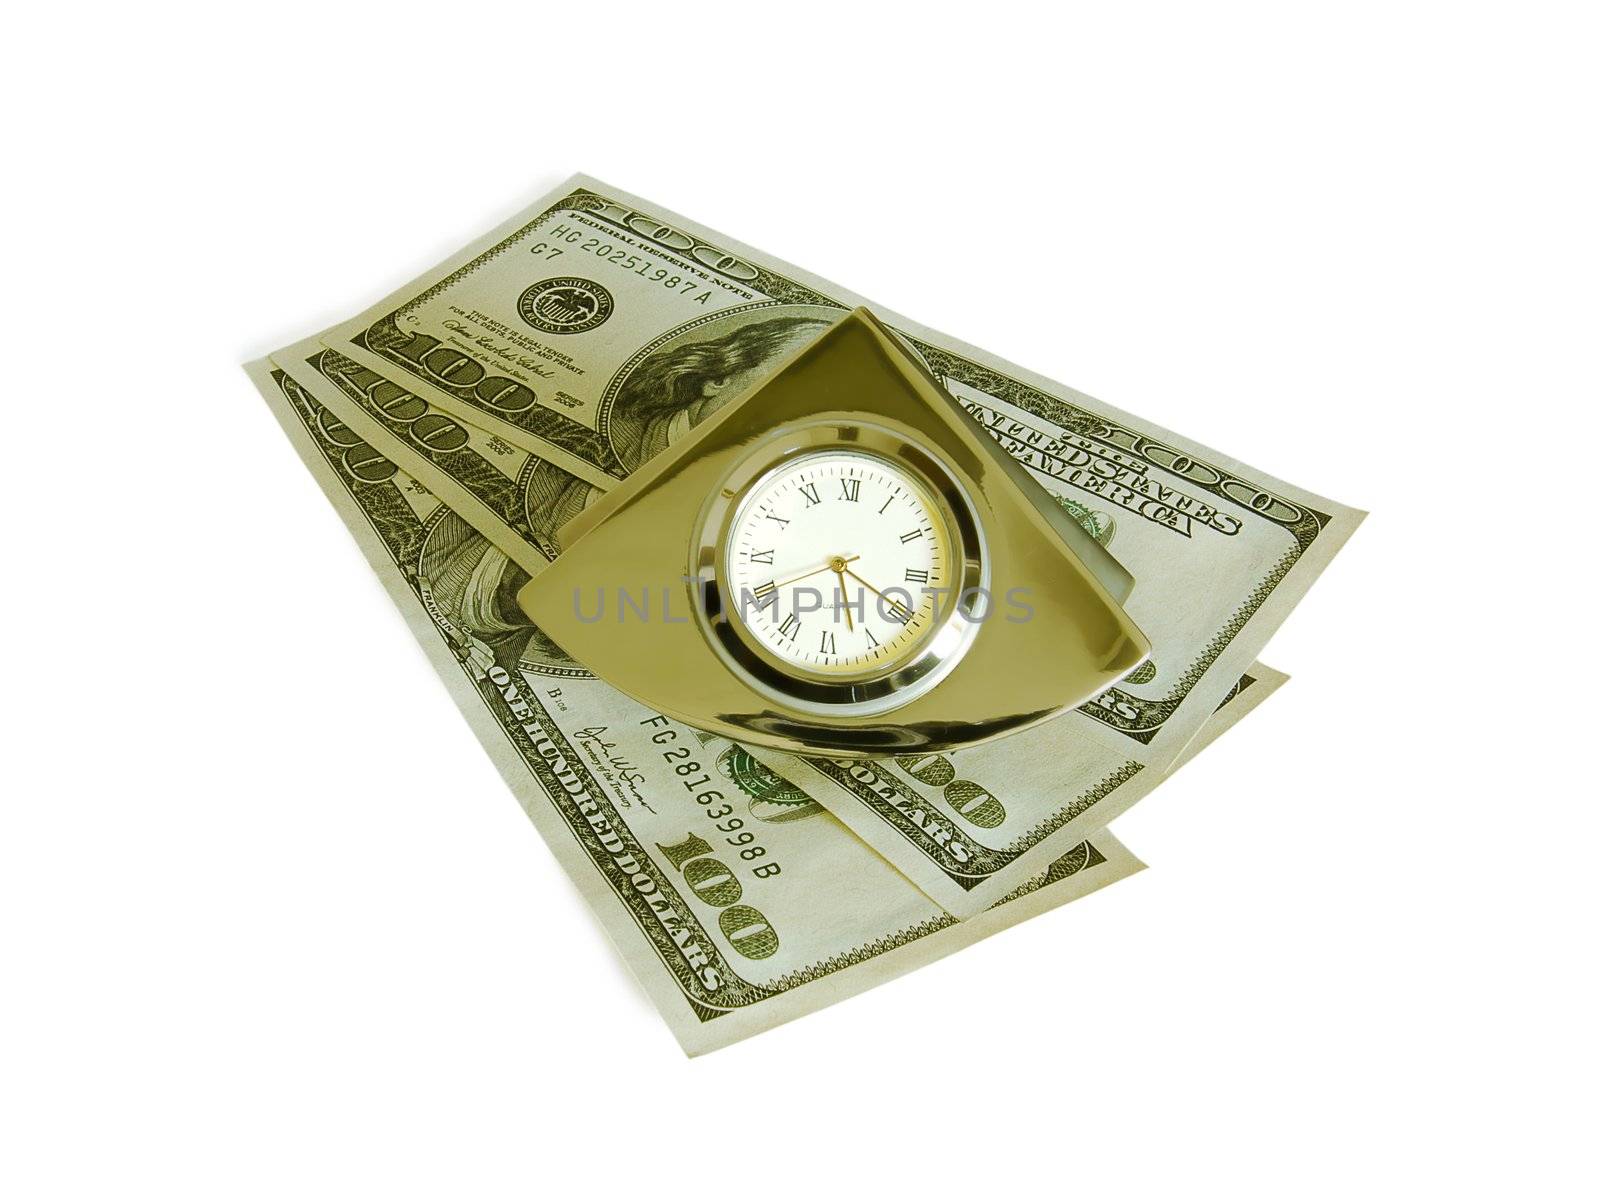 Objects on the white. A bracket clock over money.